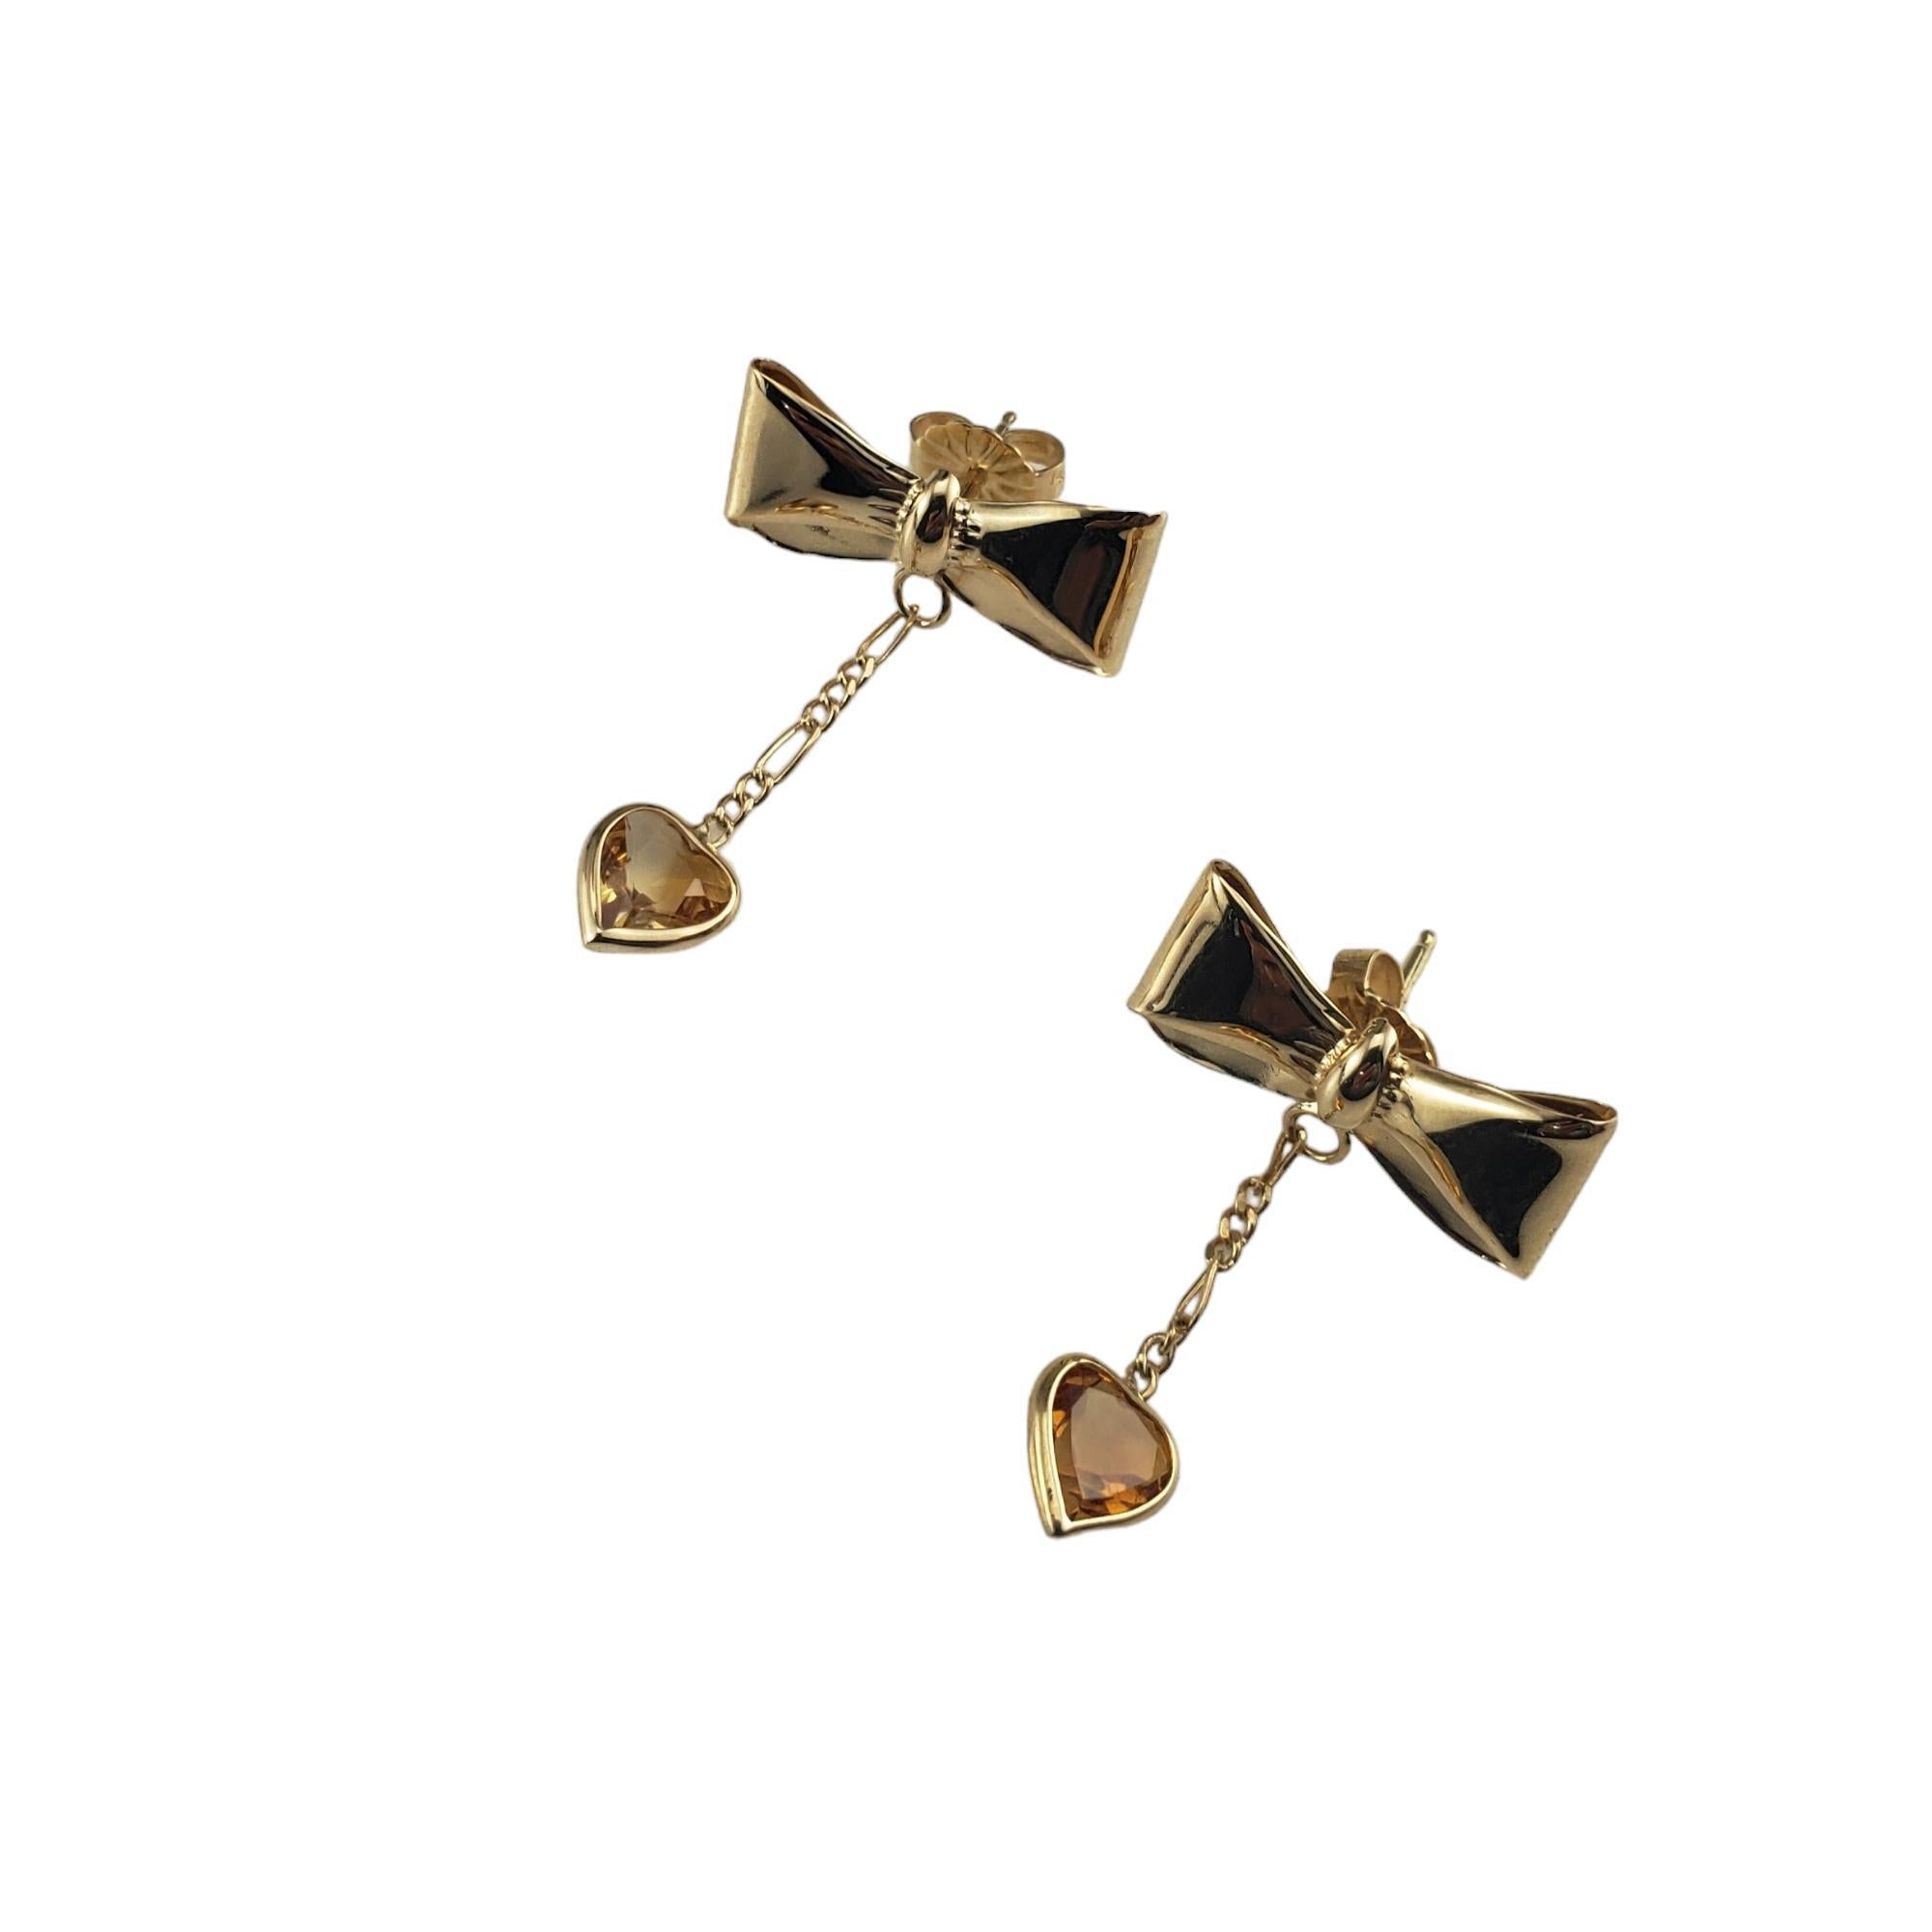 Vintage 14K Yellow Gold Bow Dangle Earrings-

These lovely bow earrings each features one dangling heart-shaped golden colored faceted stone.  Push back closures.

Size:  23 mm x 18 mm

Stamped: 14K

Weight: 1.2 dwt. / 1.9 gr.

Very good condition,